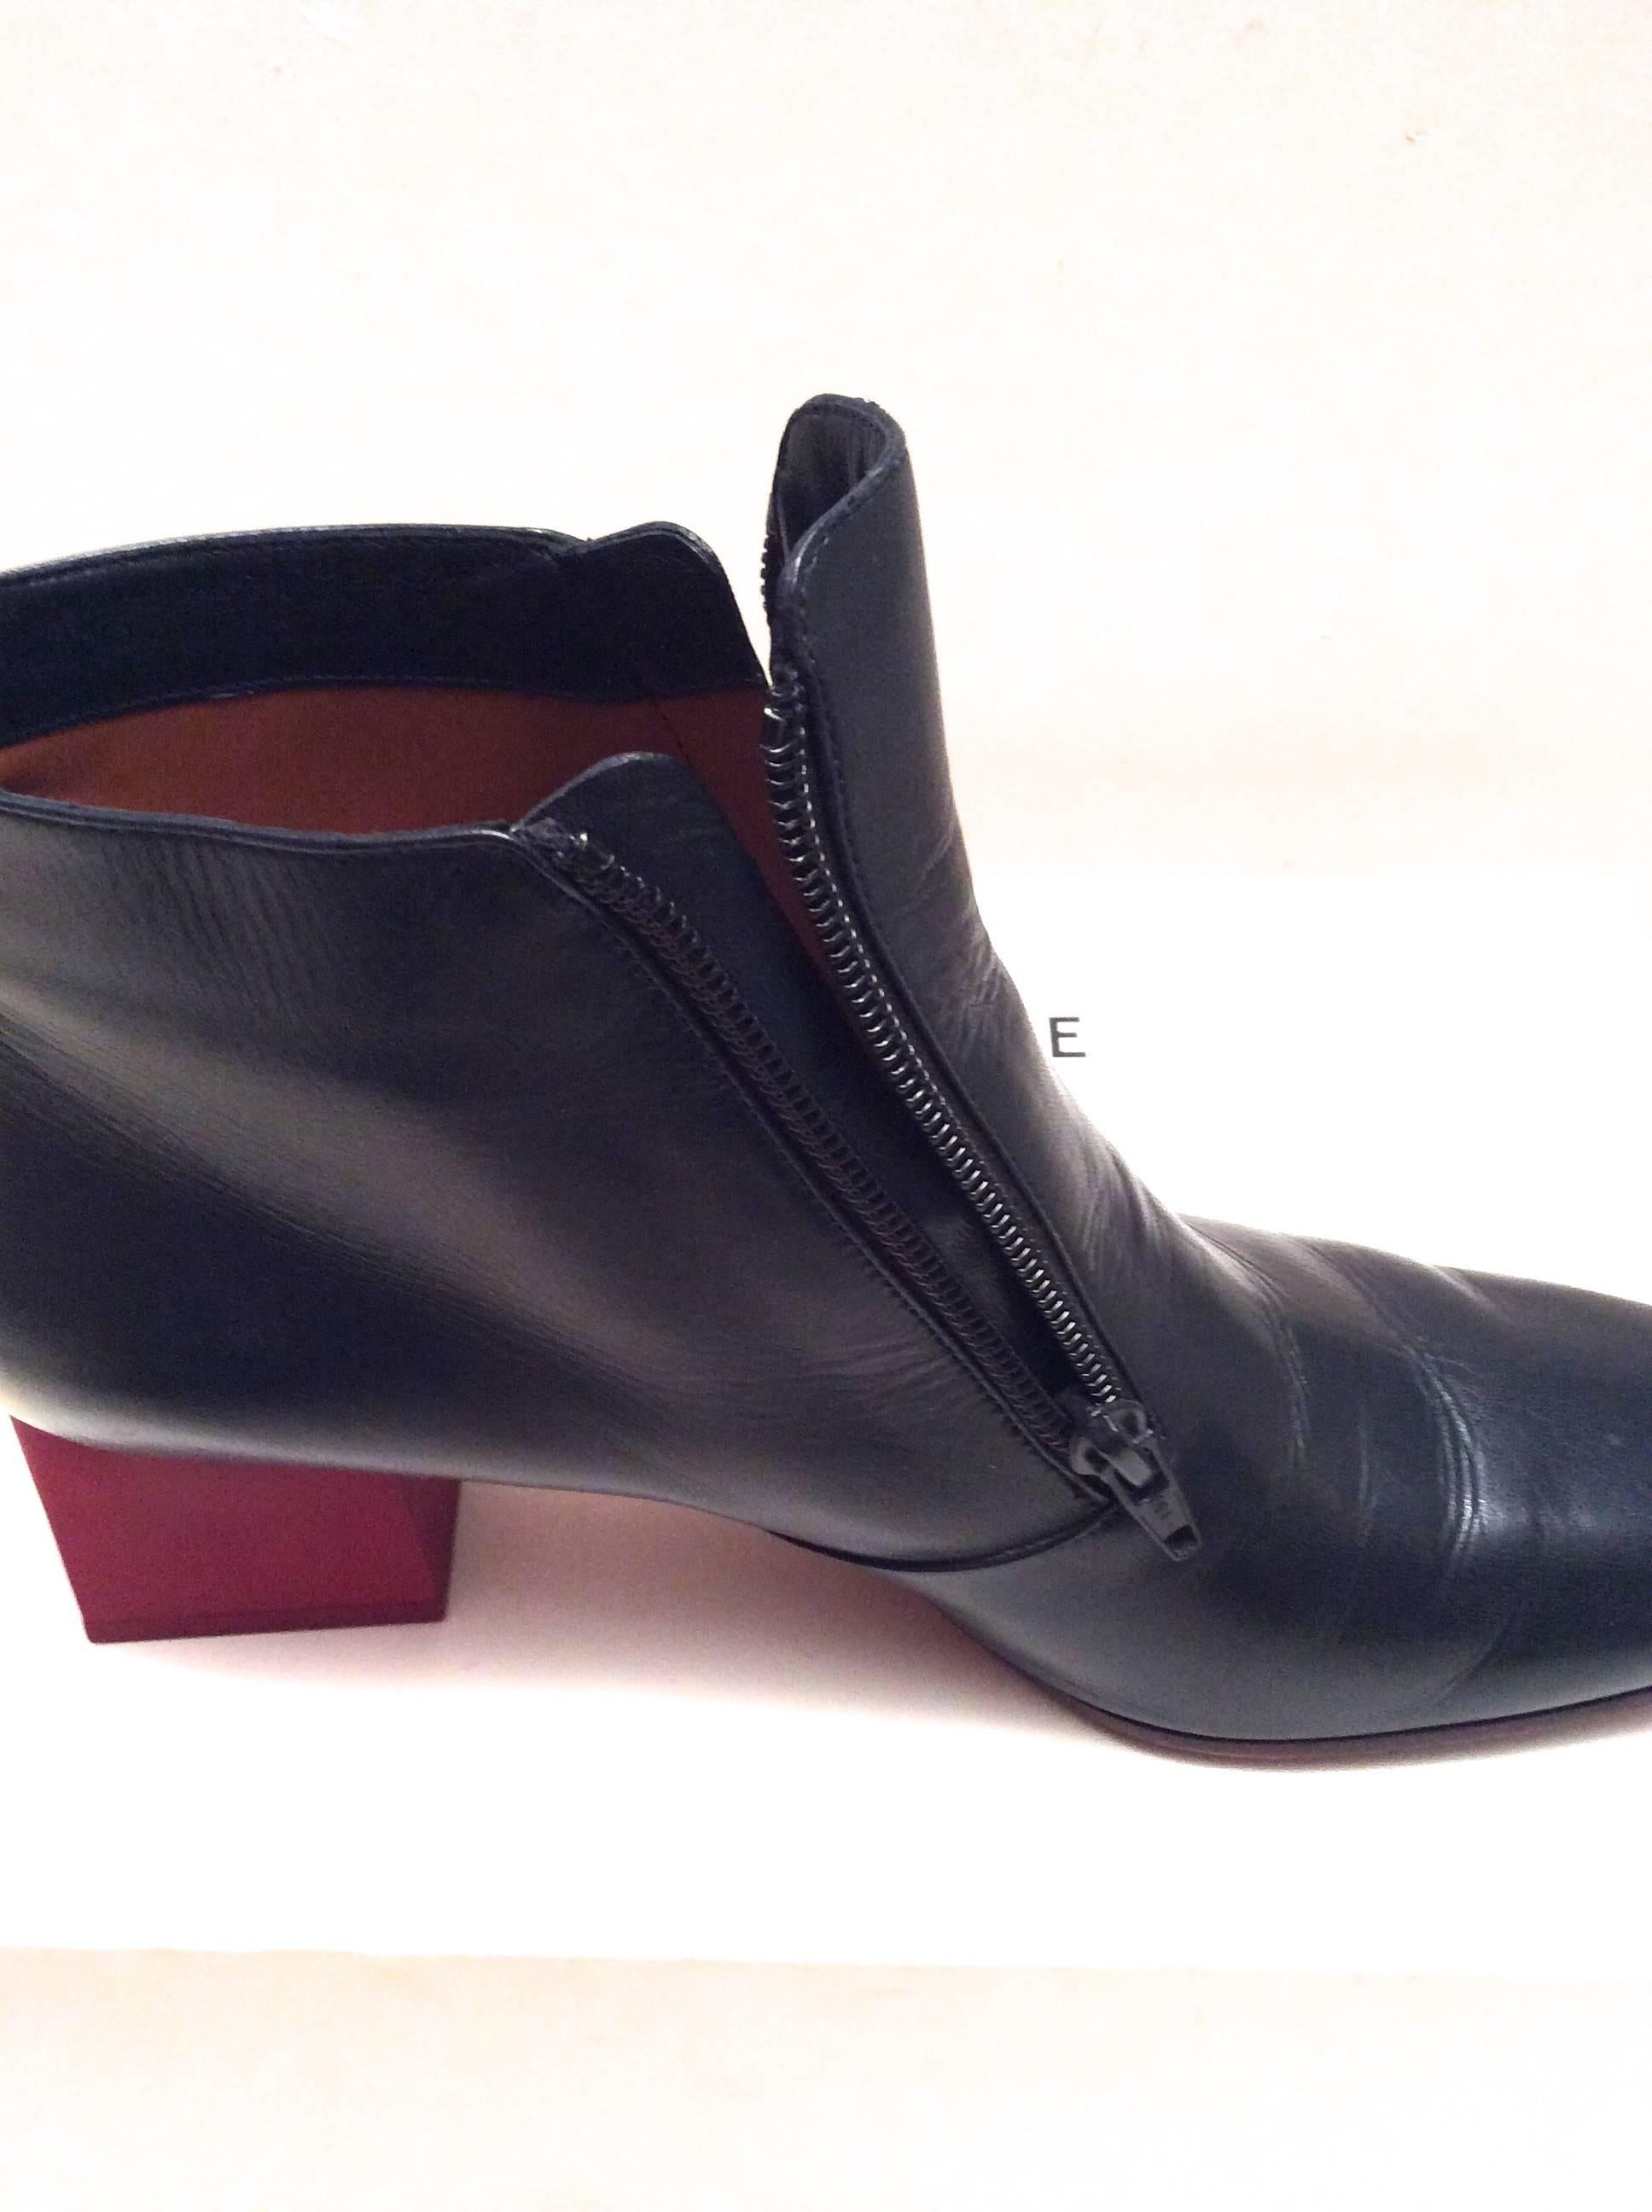 Celine Boots - Short Navy Leather with Red Heel - Size 37.5 For Sale 3